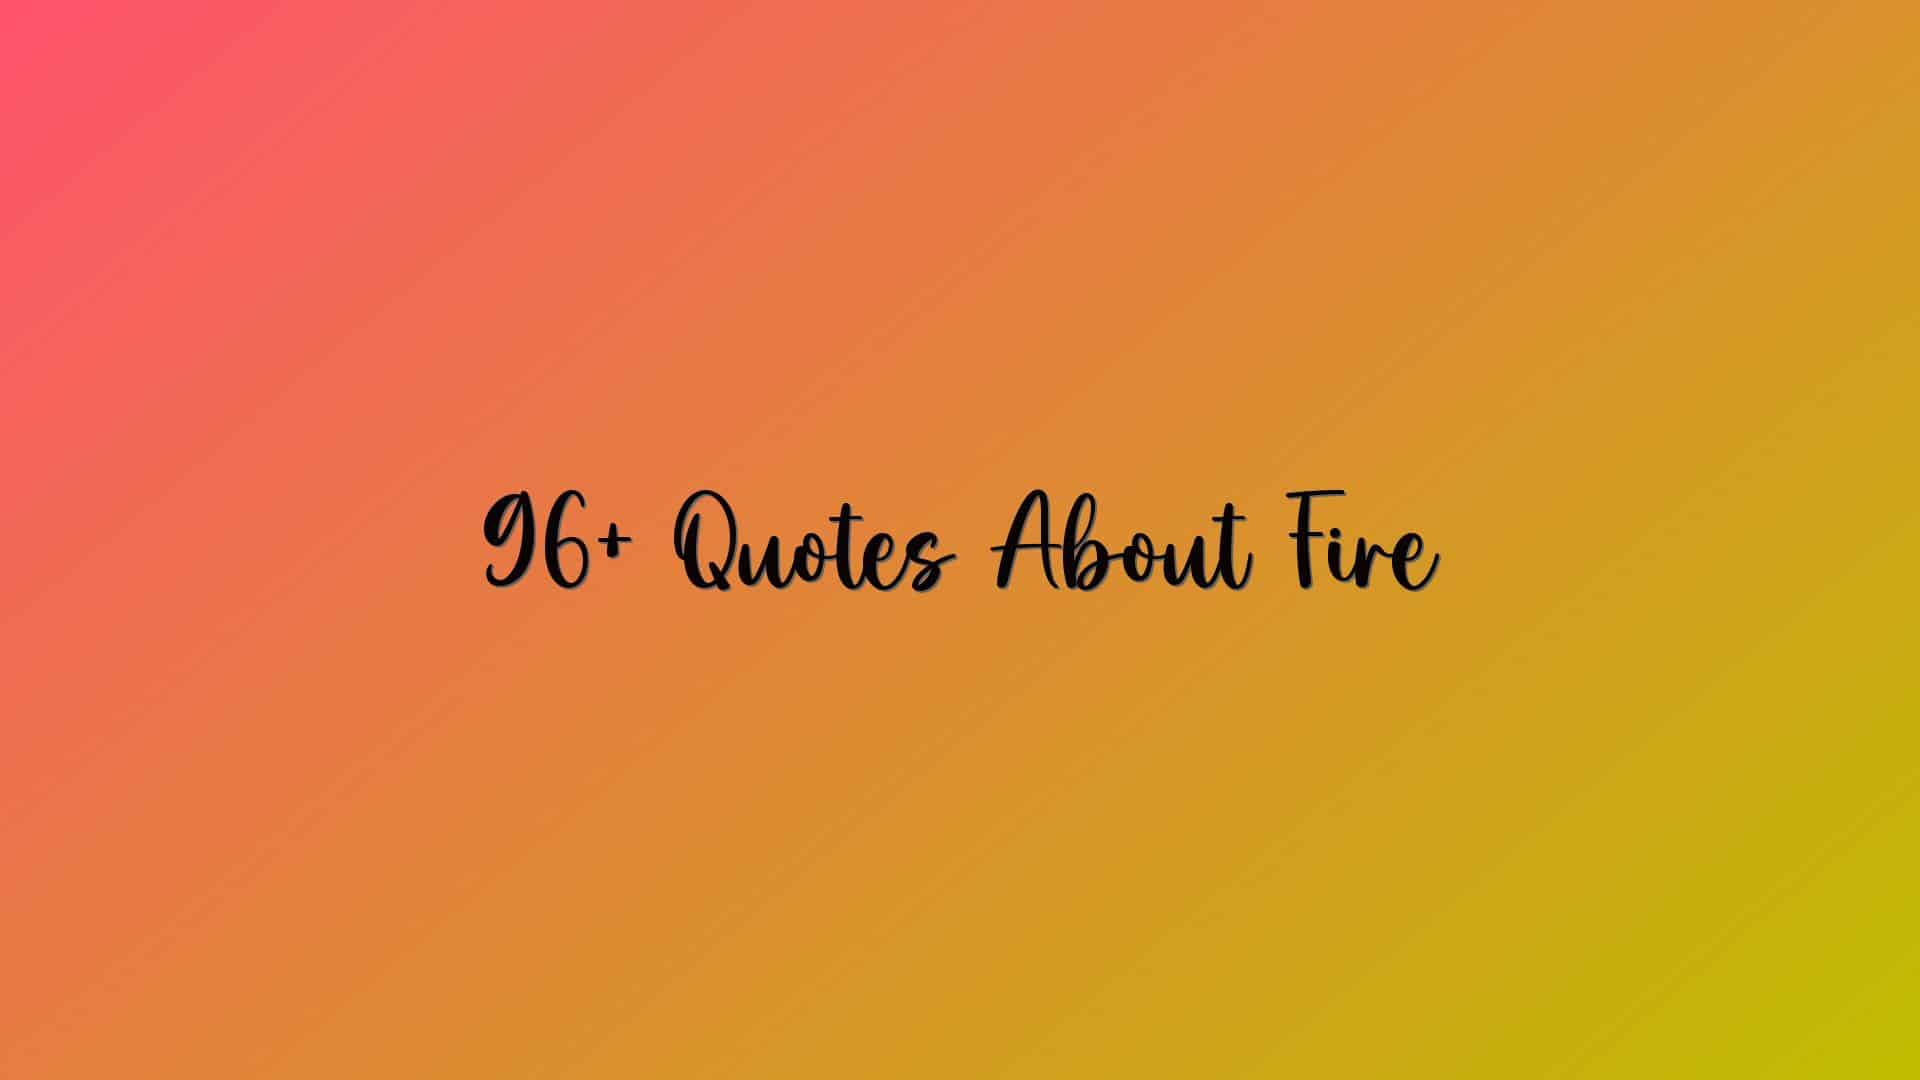 96+ Quotes About Fire